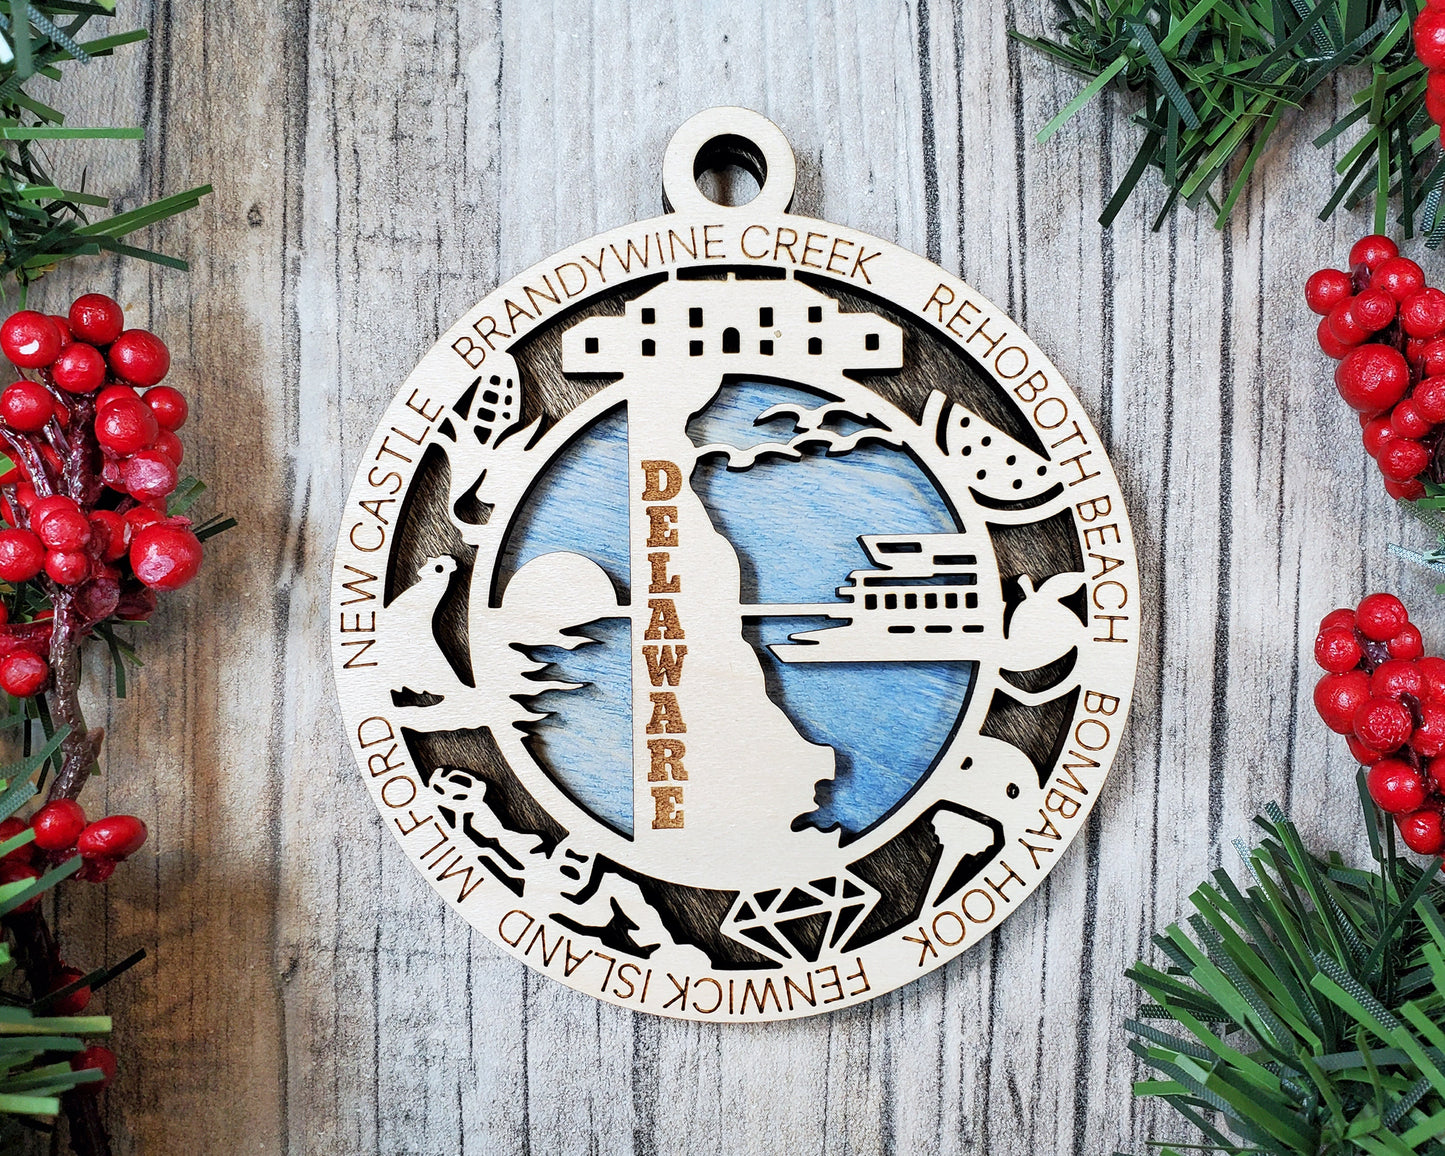 Delaware State Ornament - SVG File Download - Sized for Glowforge - Laser Ready Digital Files